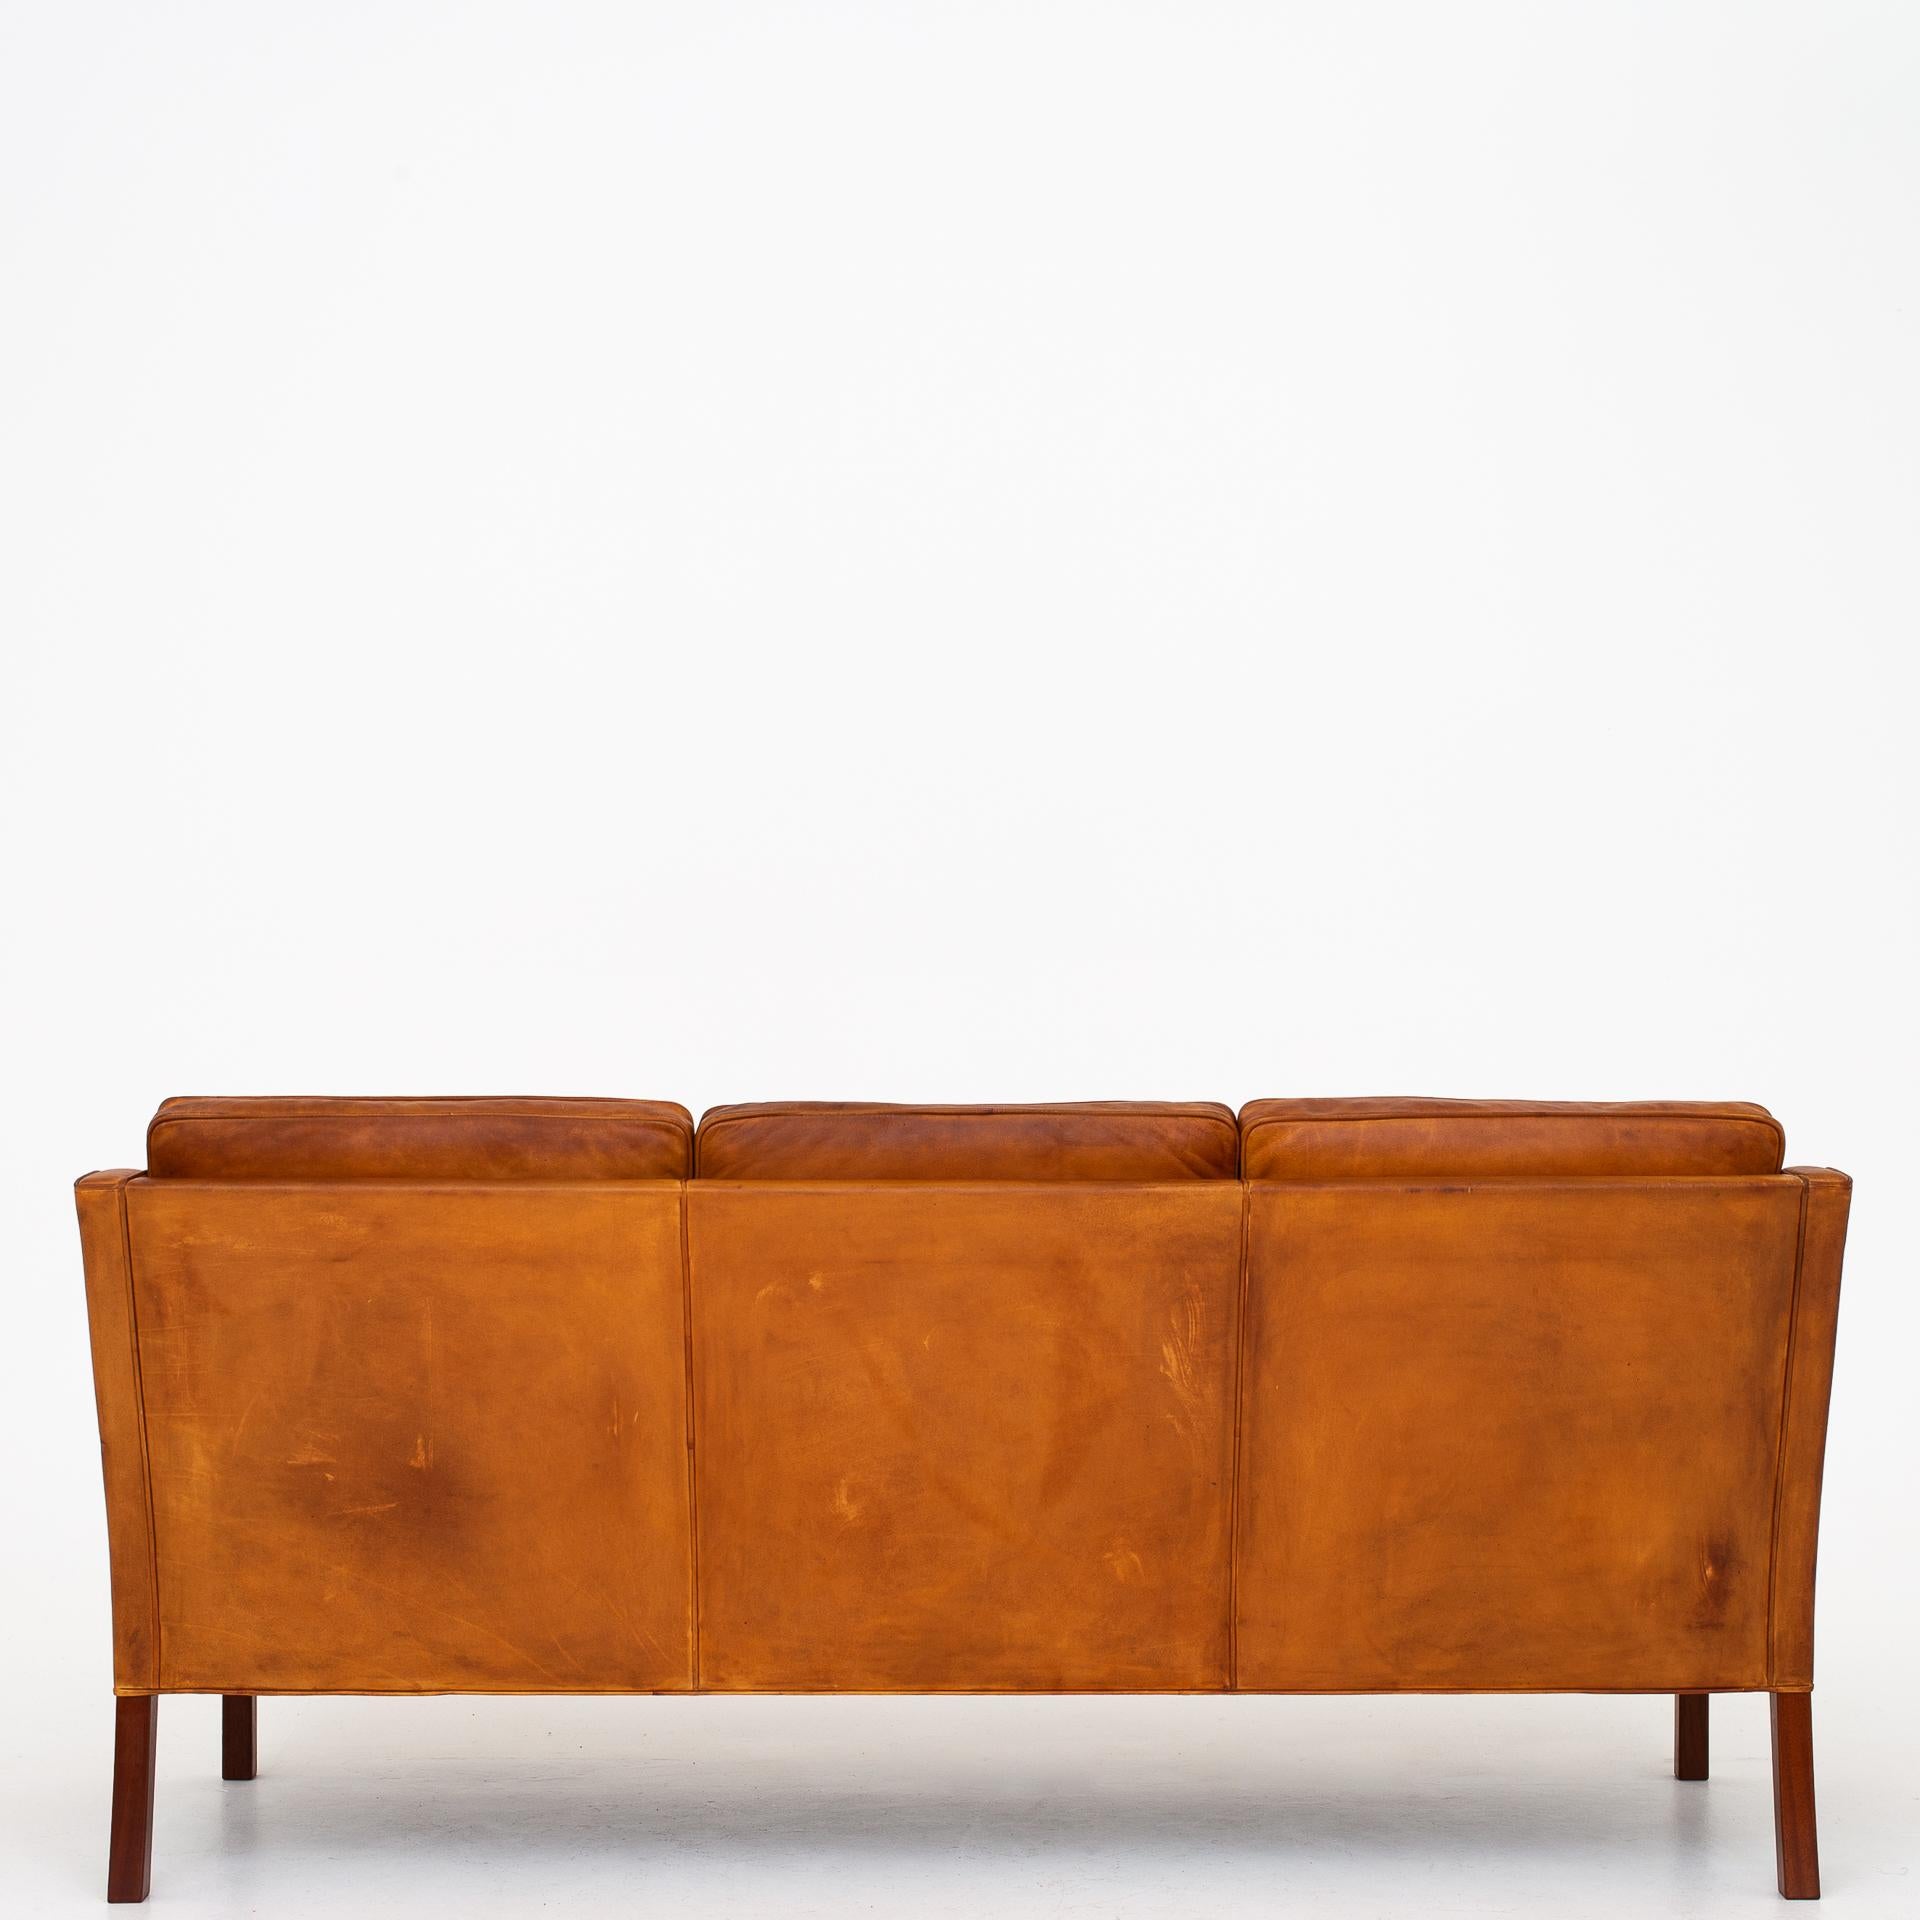 BM 2209 - Sofa in patinated natrual leather and legs in mahogany. Maker Fredericia Furniture.